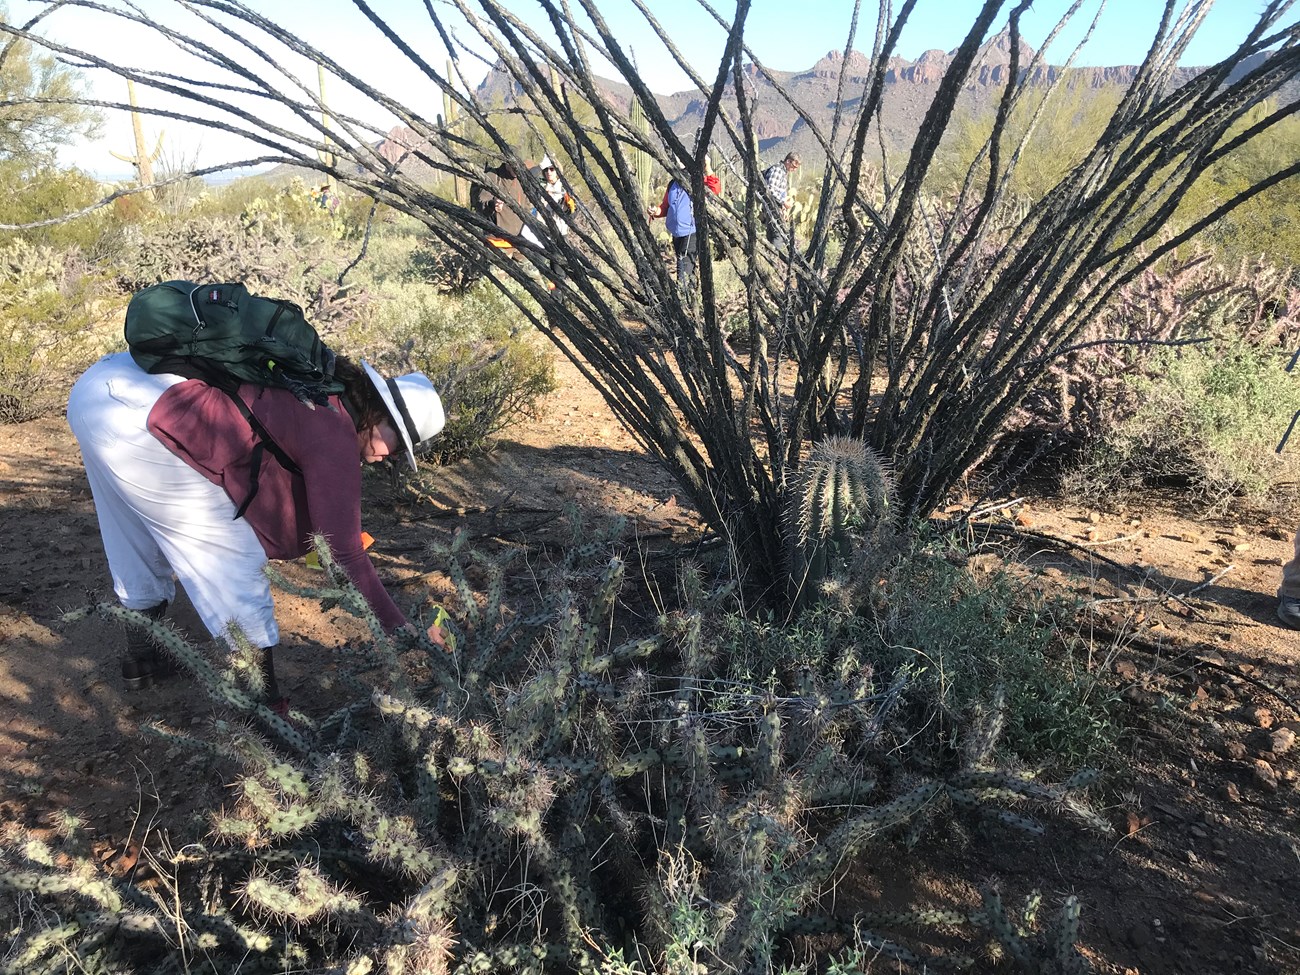 A woman bending to put a flag on a short saguaro. Around her are an ocatillo, chollas, and other saguaros.